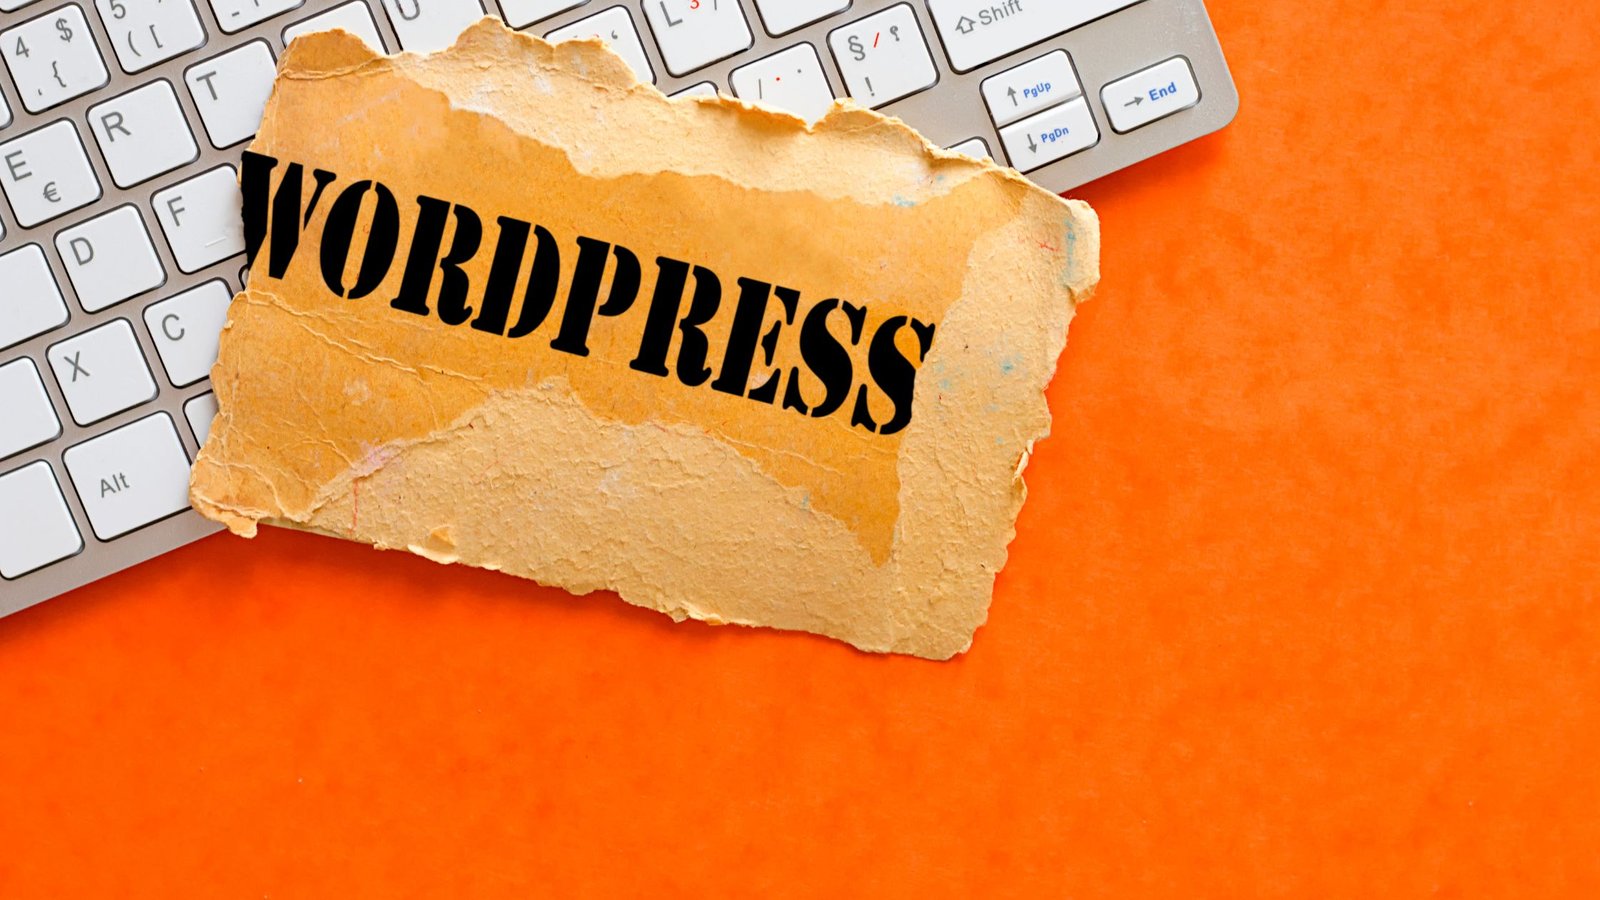 The Top Free WordPress Themes for AdSense Approval